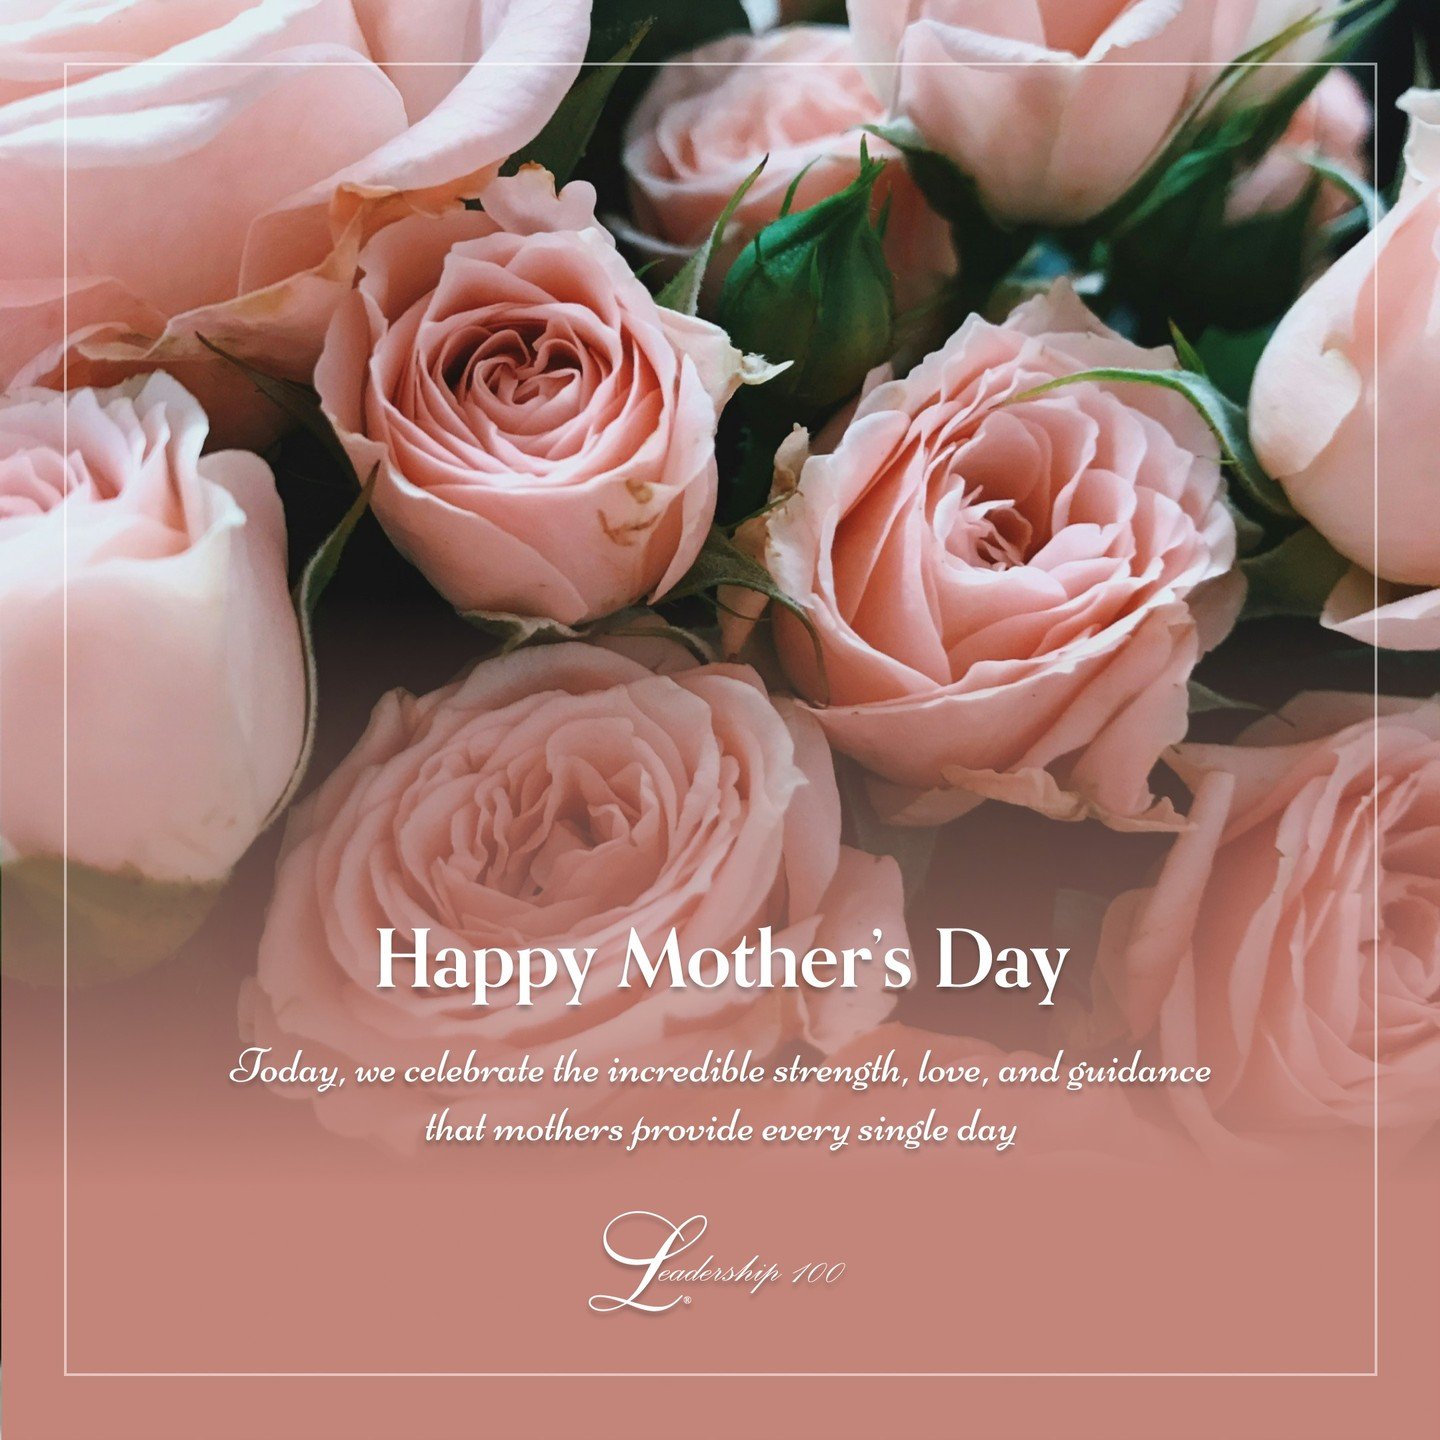 🌸 Happy Mother's Day from Leadership 100. Today, we celebrate the incredible strength, love, and guidance that mothers provide every single day. To all the amazing mothers, thank you for your unwavering support and dedication.